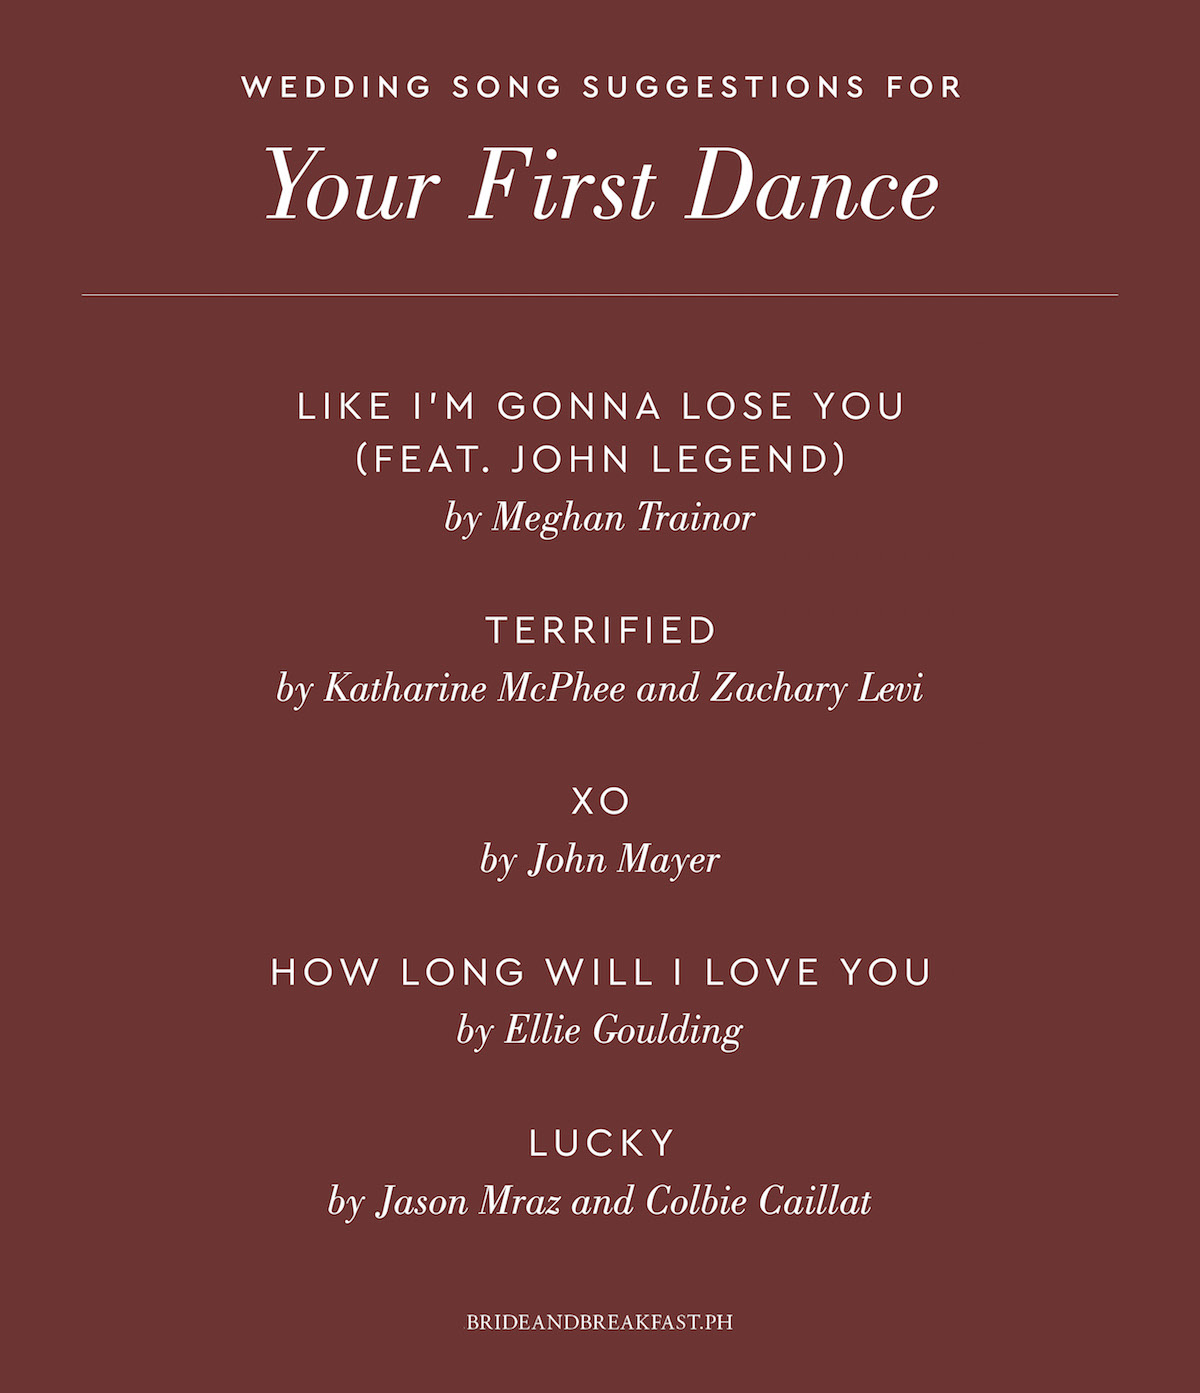 Like I’m Gonna Lose You (feat. John Legend) by Meghan Trainor Terrified by Katharine McPhee and Zachary Levi XO by John Mayer How Long Will I Love You by Ellie Goulding Lucky by Jason Mraz and Colbie Caillat